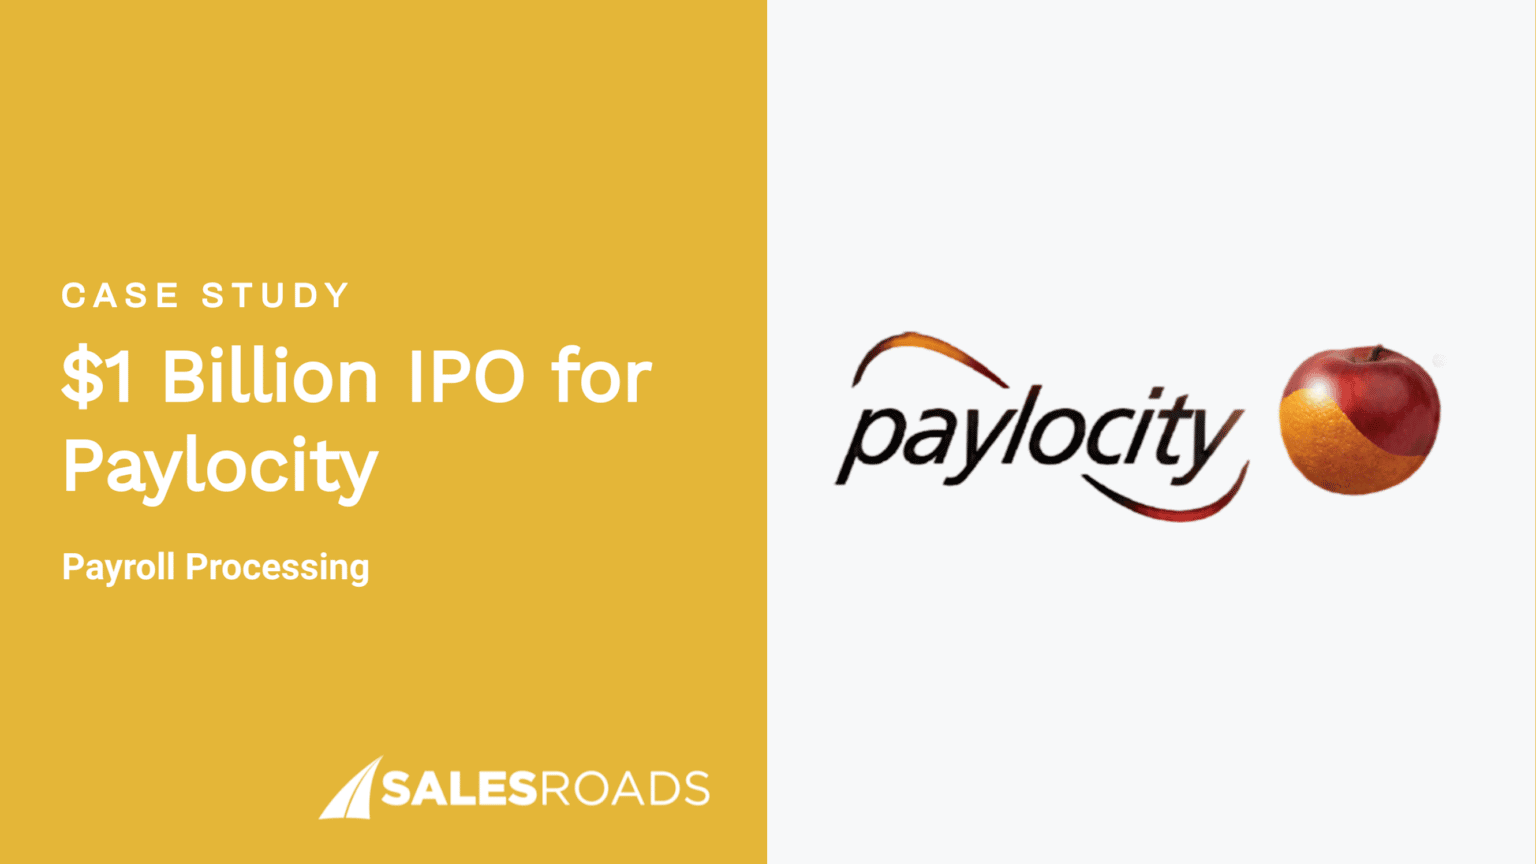 Case Study: $1 Billion IPO for Paylocity.